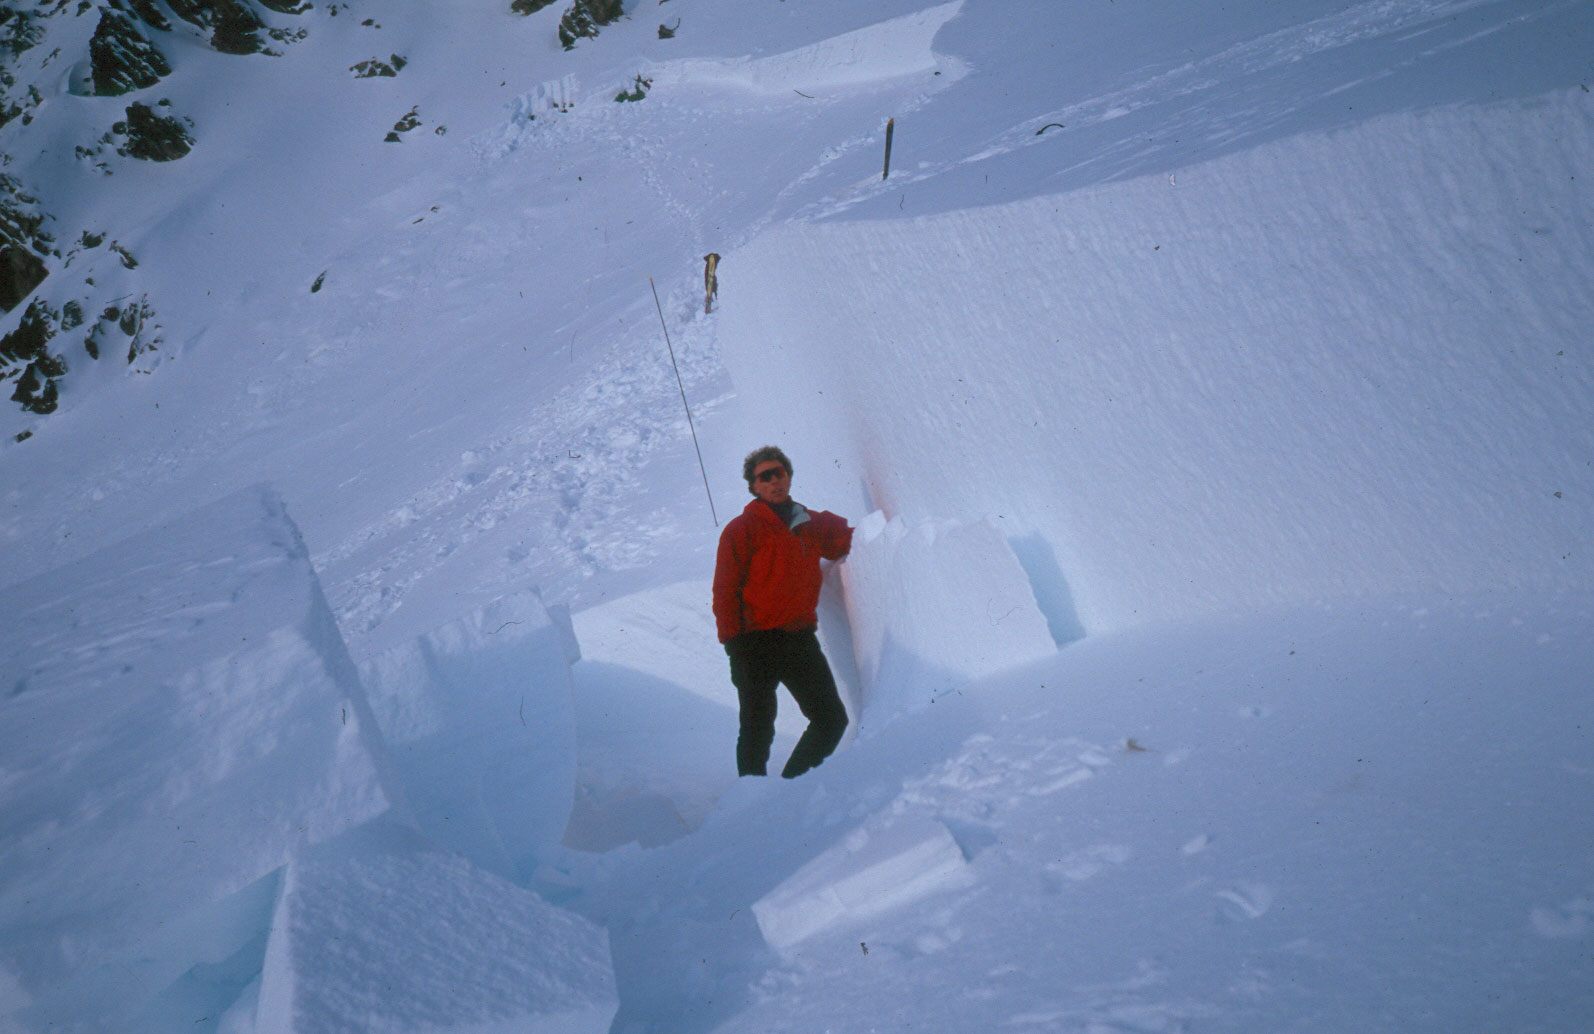 A man in a red ski jacket stands in a mountain environment next to a vertical wall of snow that is almost twice his height.